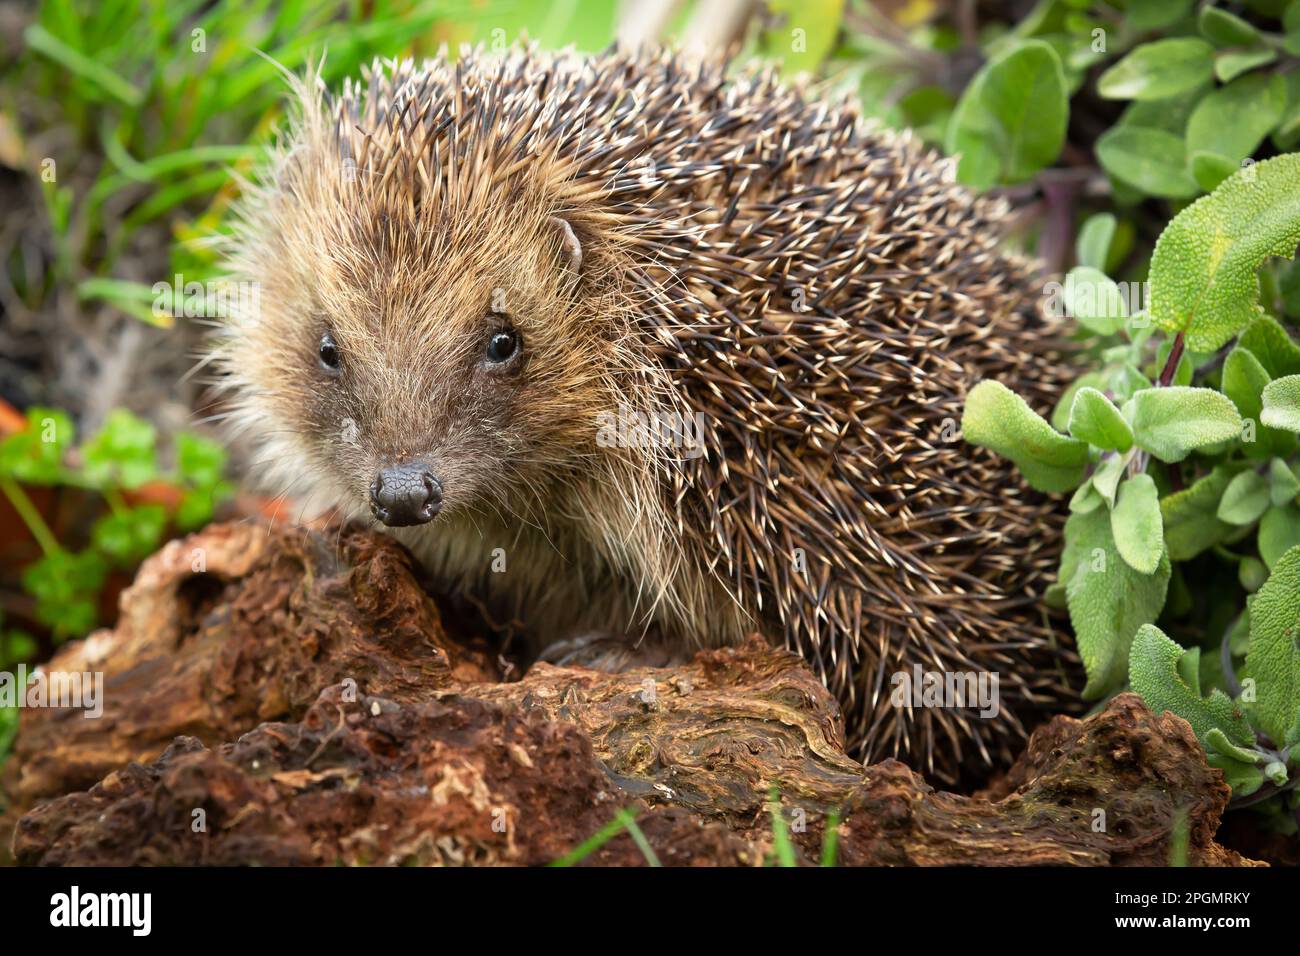 https://c8.alamy.com/comp/2PGMRKY/hedgehog-close-up-of-a-wild-native-european-hedgehog-scientific-name-erinaceus-europaeus-foraging-in-a-herb-garden-with-sage-leaves-facing-front-2PGMRKY.jpg